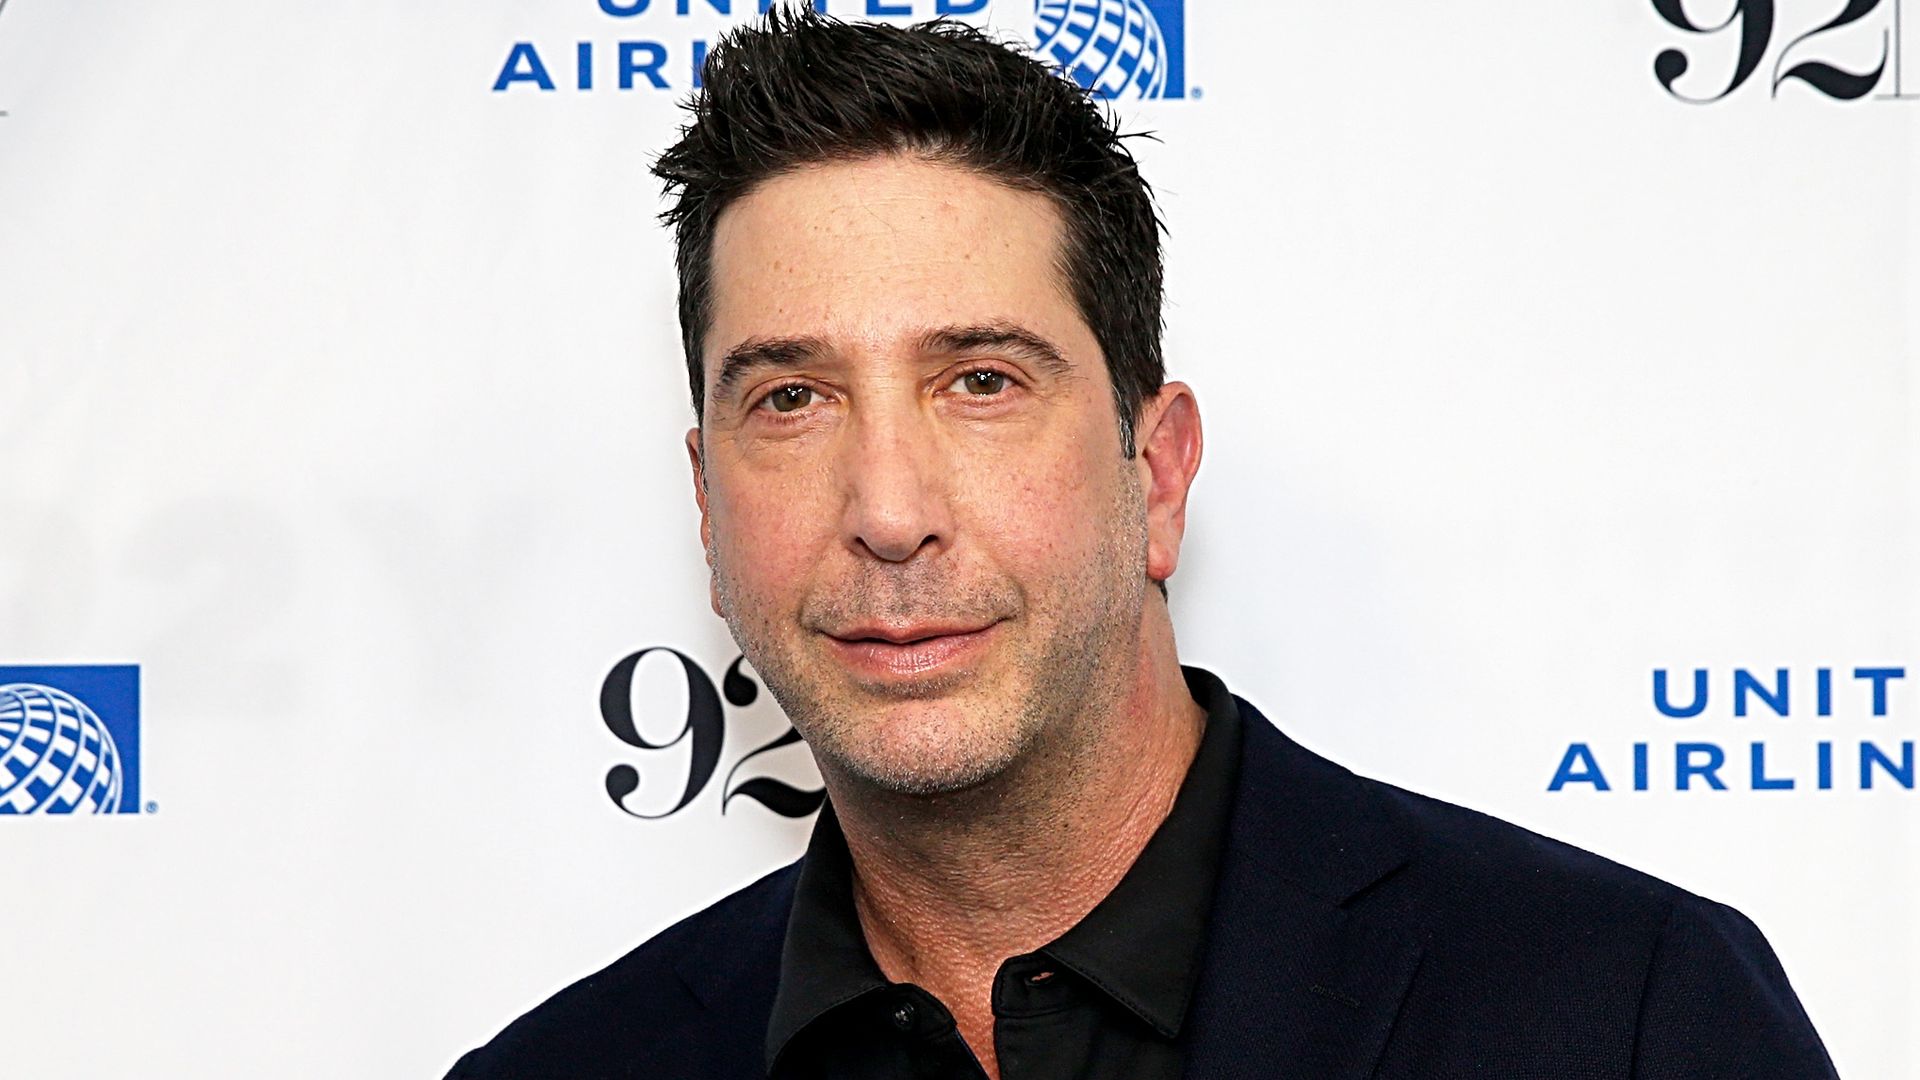 David Schwimmer attends a conversation with James Burrows at The 92nd Street Y, New York on June 08, 2022